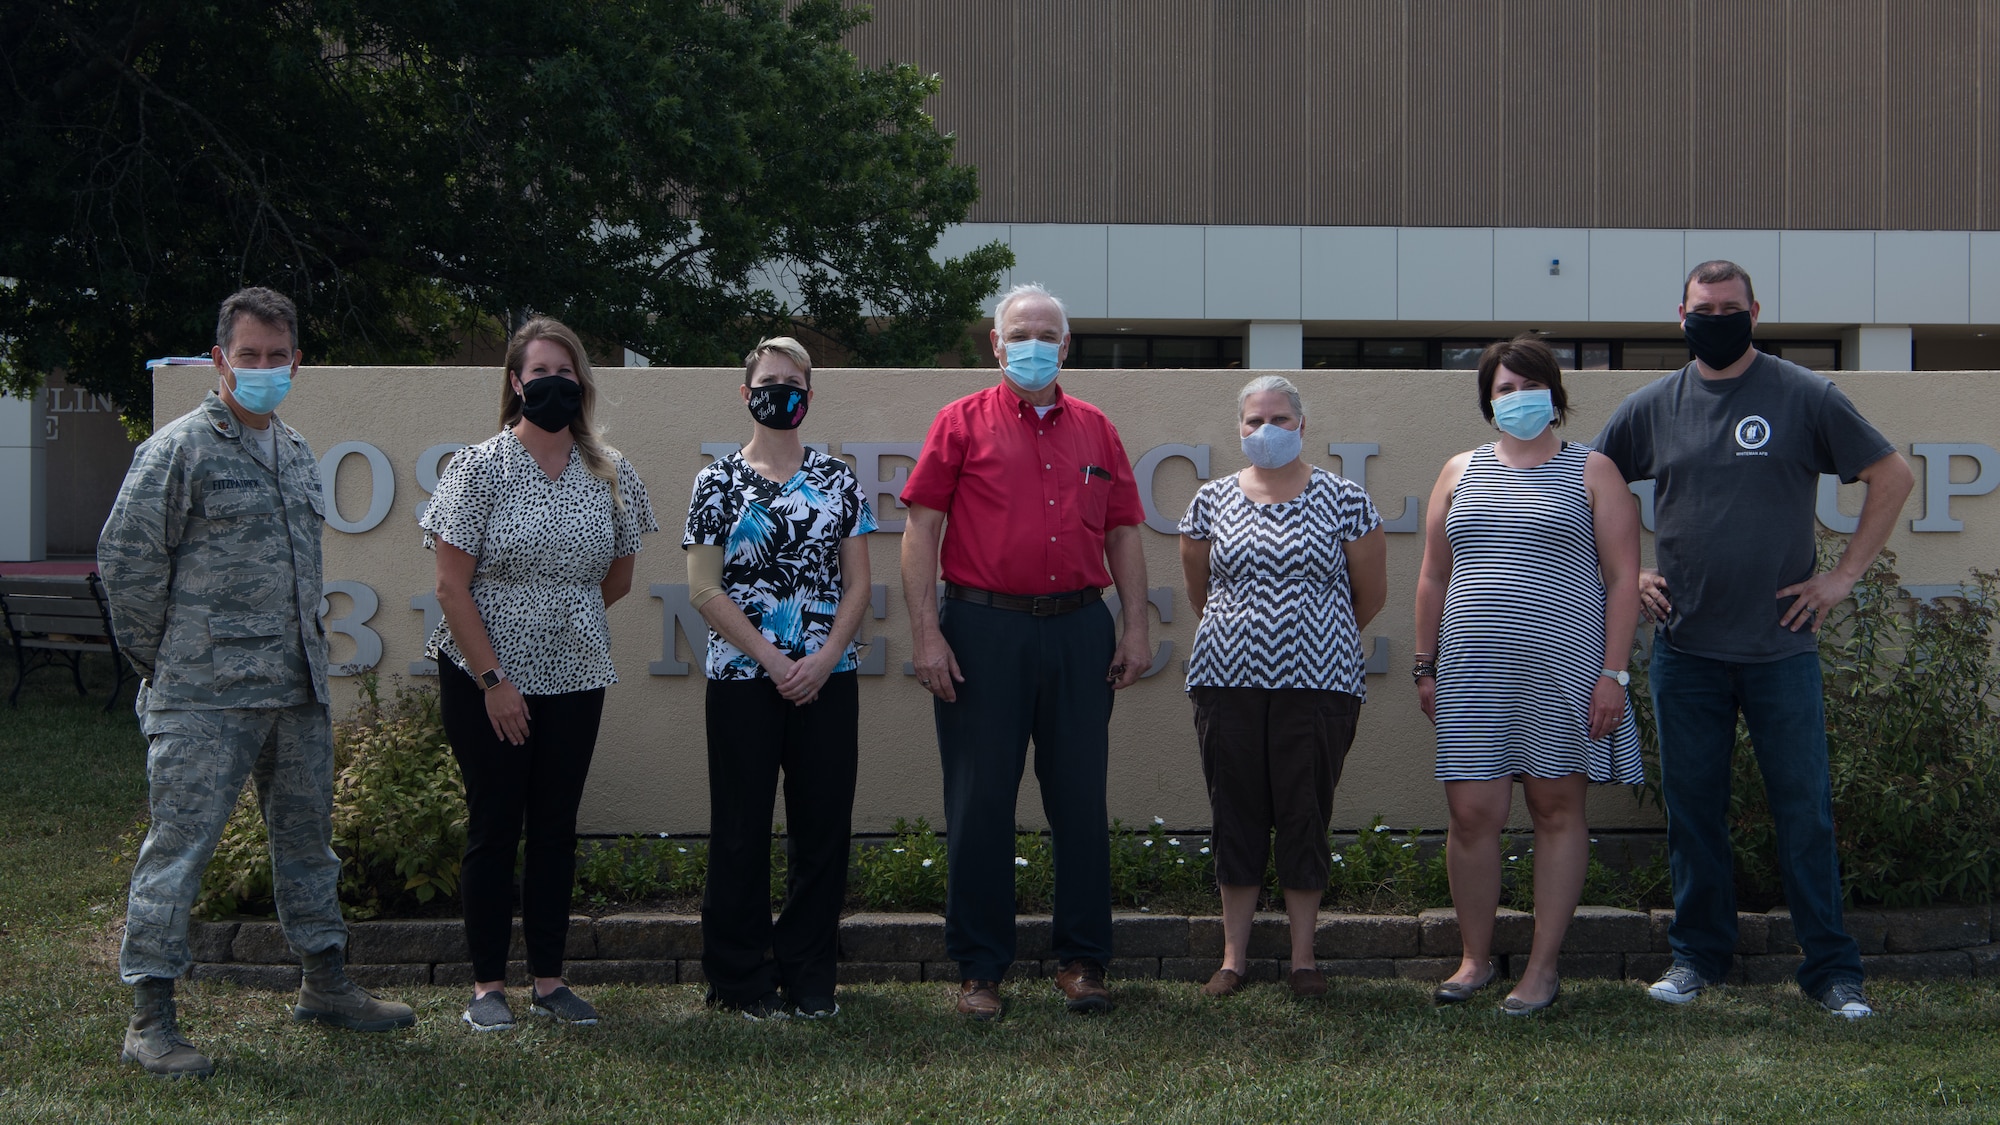 Members of the 509th Medical Group Family Advocacy Program stand for a photo on August 28, 2020 in front of the 509th MDG Clinic at Whiteman Air Force Base, Missouri. The Family Advocacy Program provides support for families through education along with prevention and response to domestic violence. (U.S. Air Force photo by Airman 1st Class Parker J. McCauley)